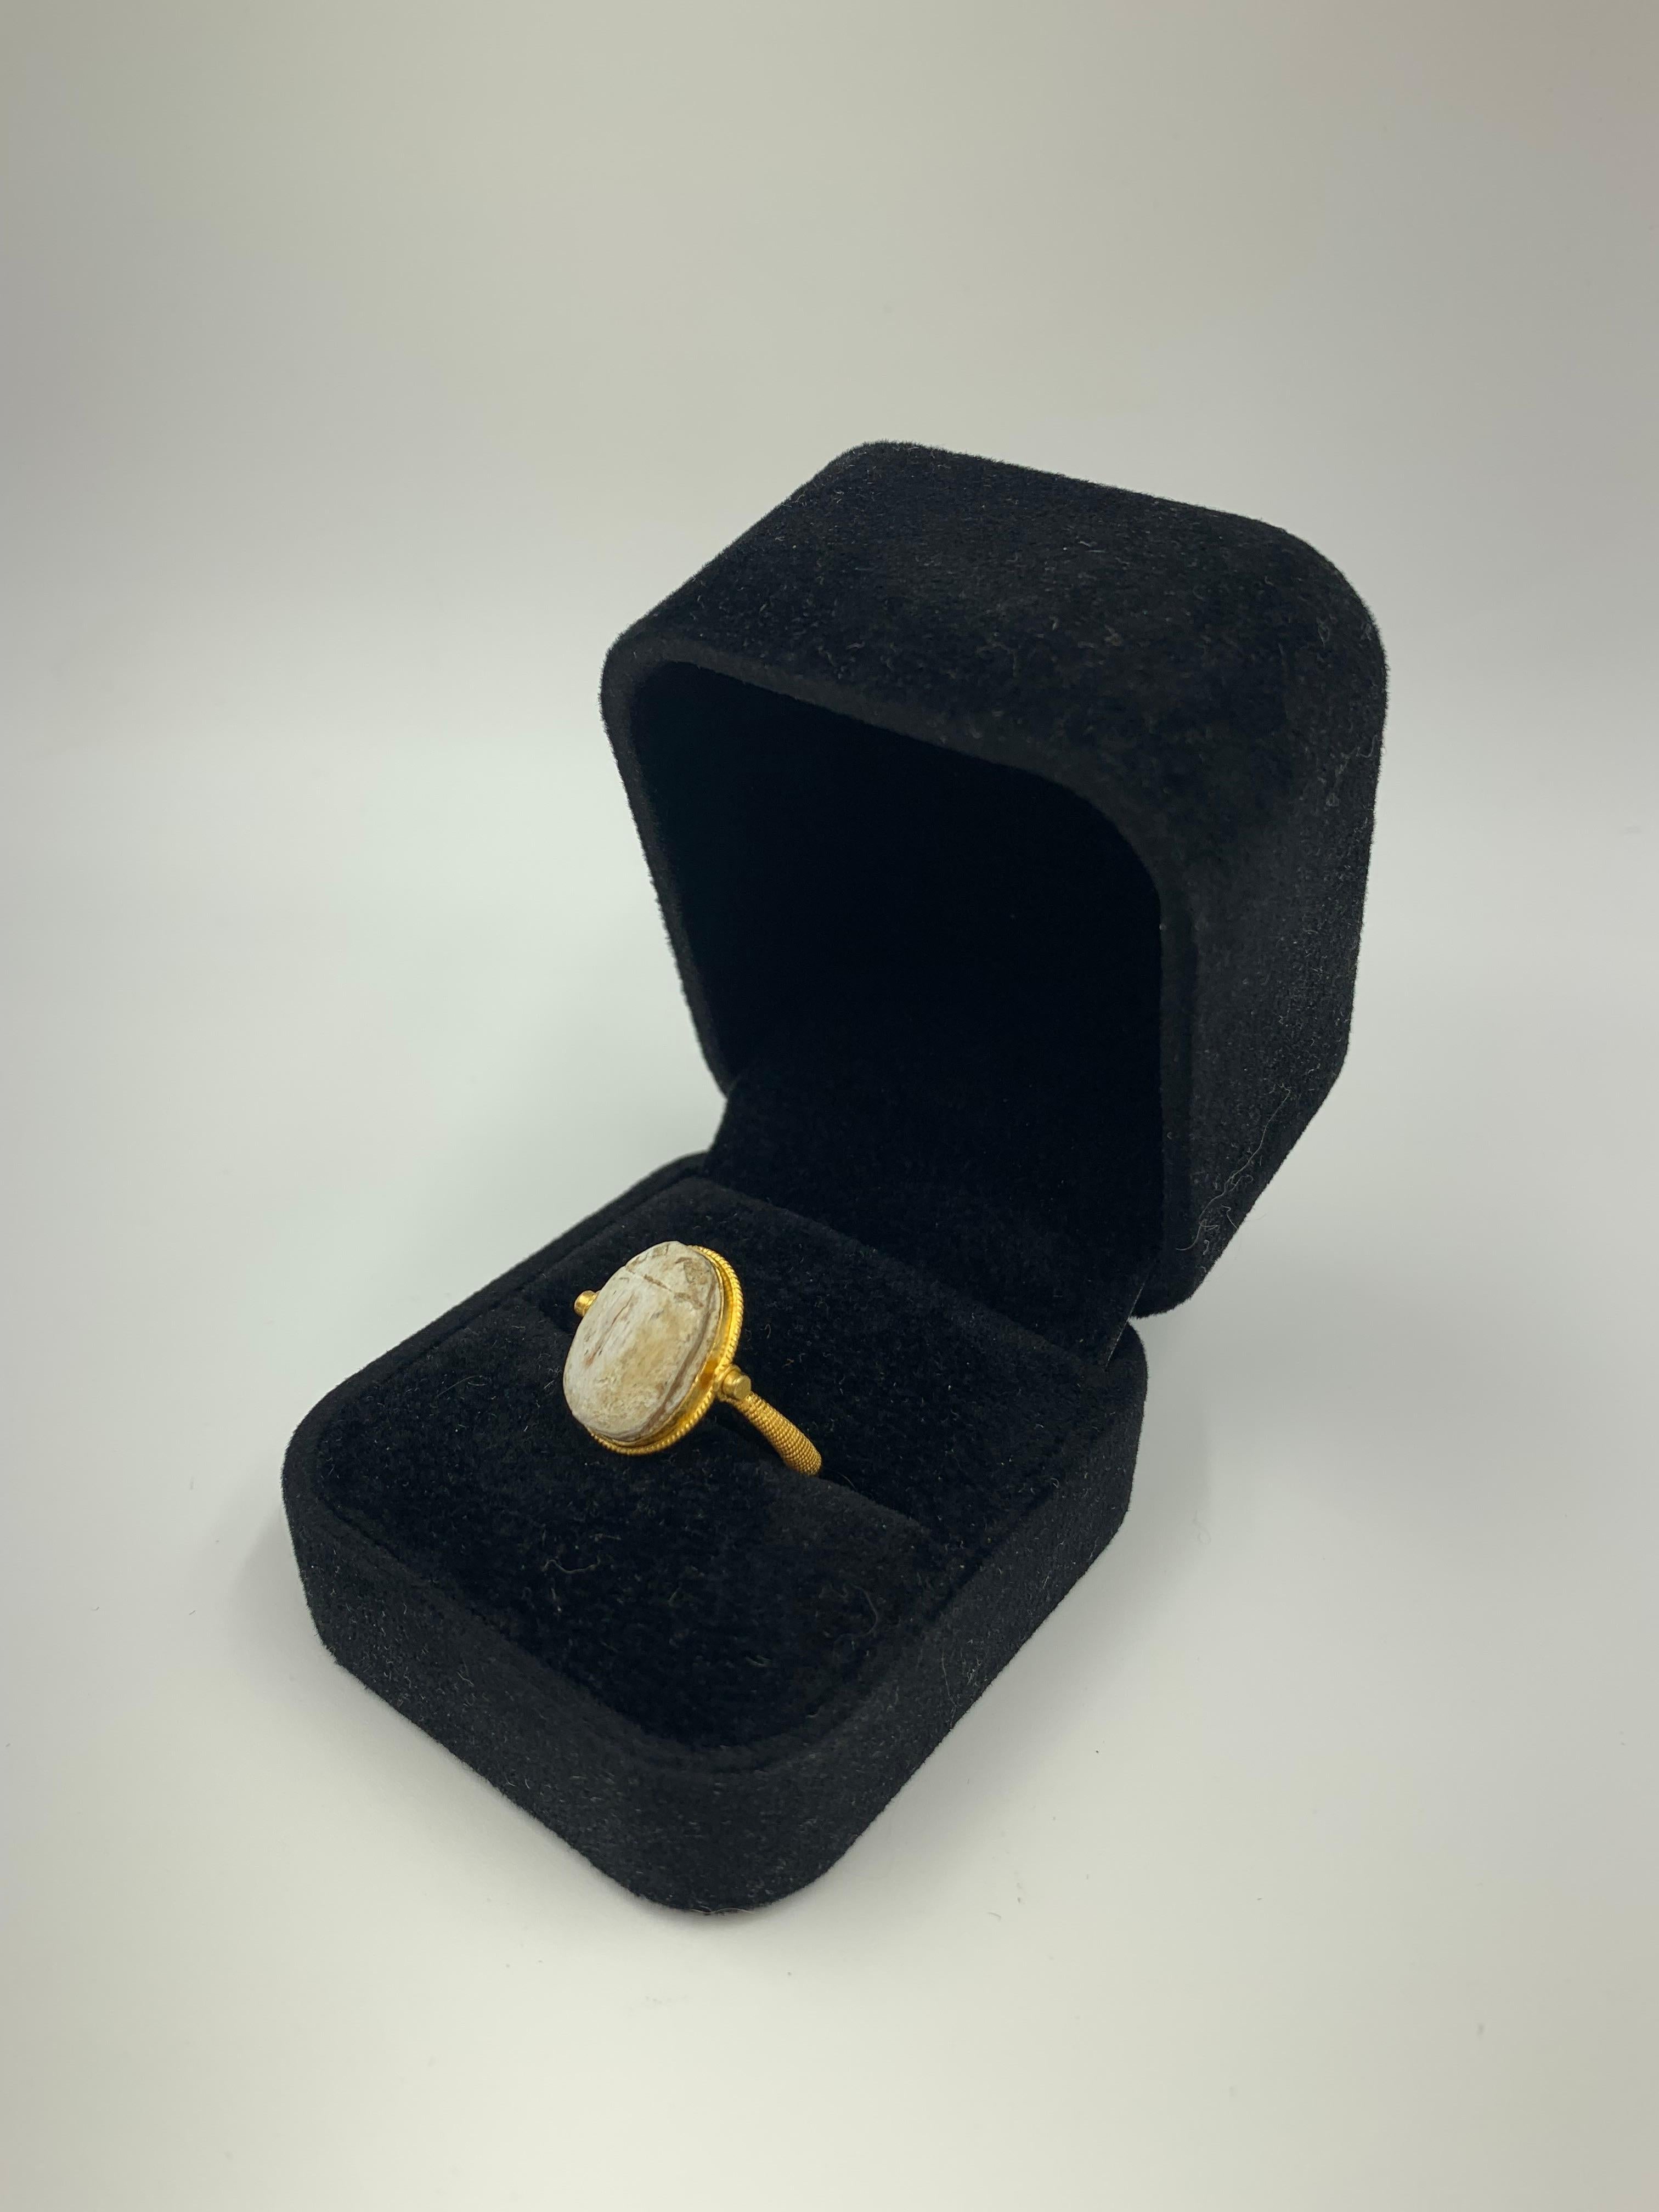 Ancient Egyptian Steatite Scarab Amulet 22K Yellow Gold Swivel Signet Ring In Good Condition For Sale In New York, NY